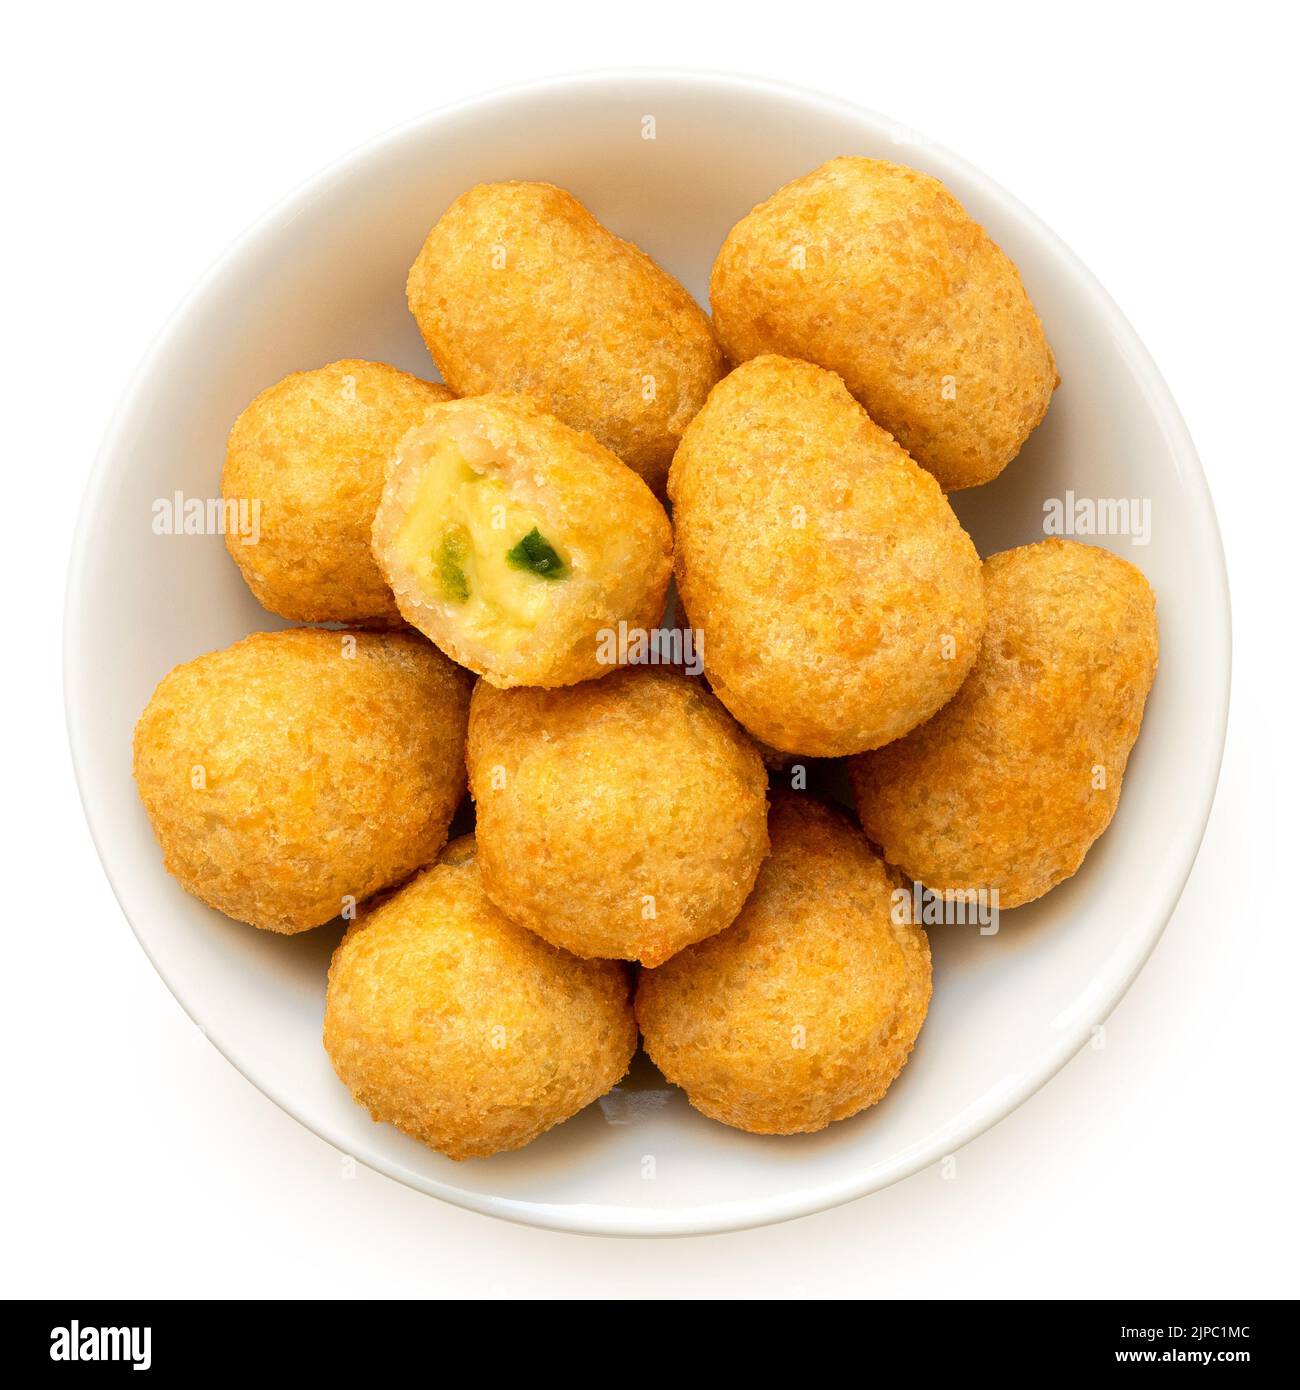 Fried breaded chilli cheese nuggets in a white ceramic bowl isolated on white. One eaten. Top view. Stock Photo